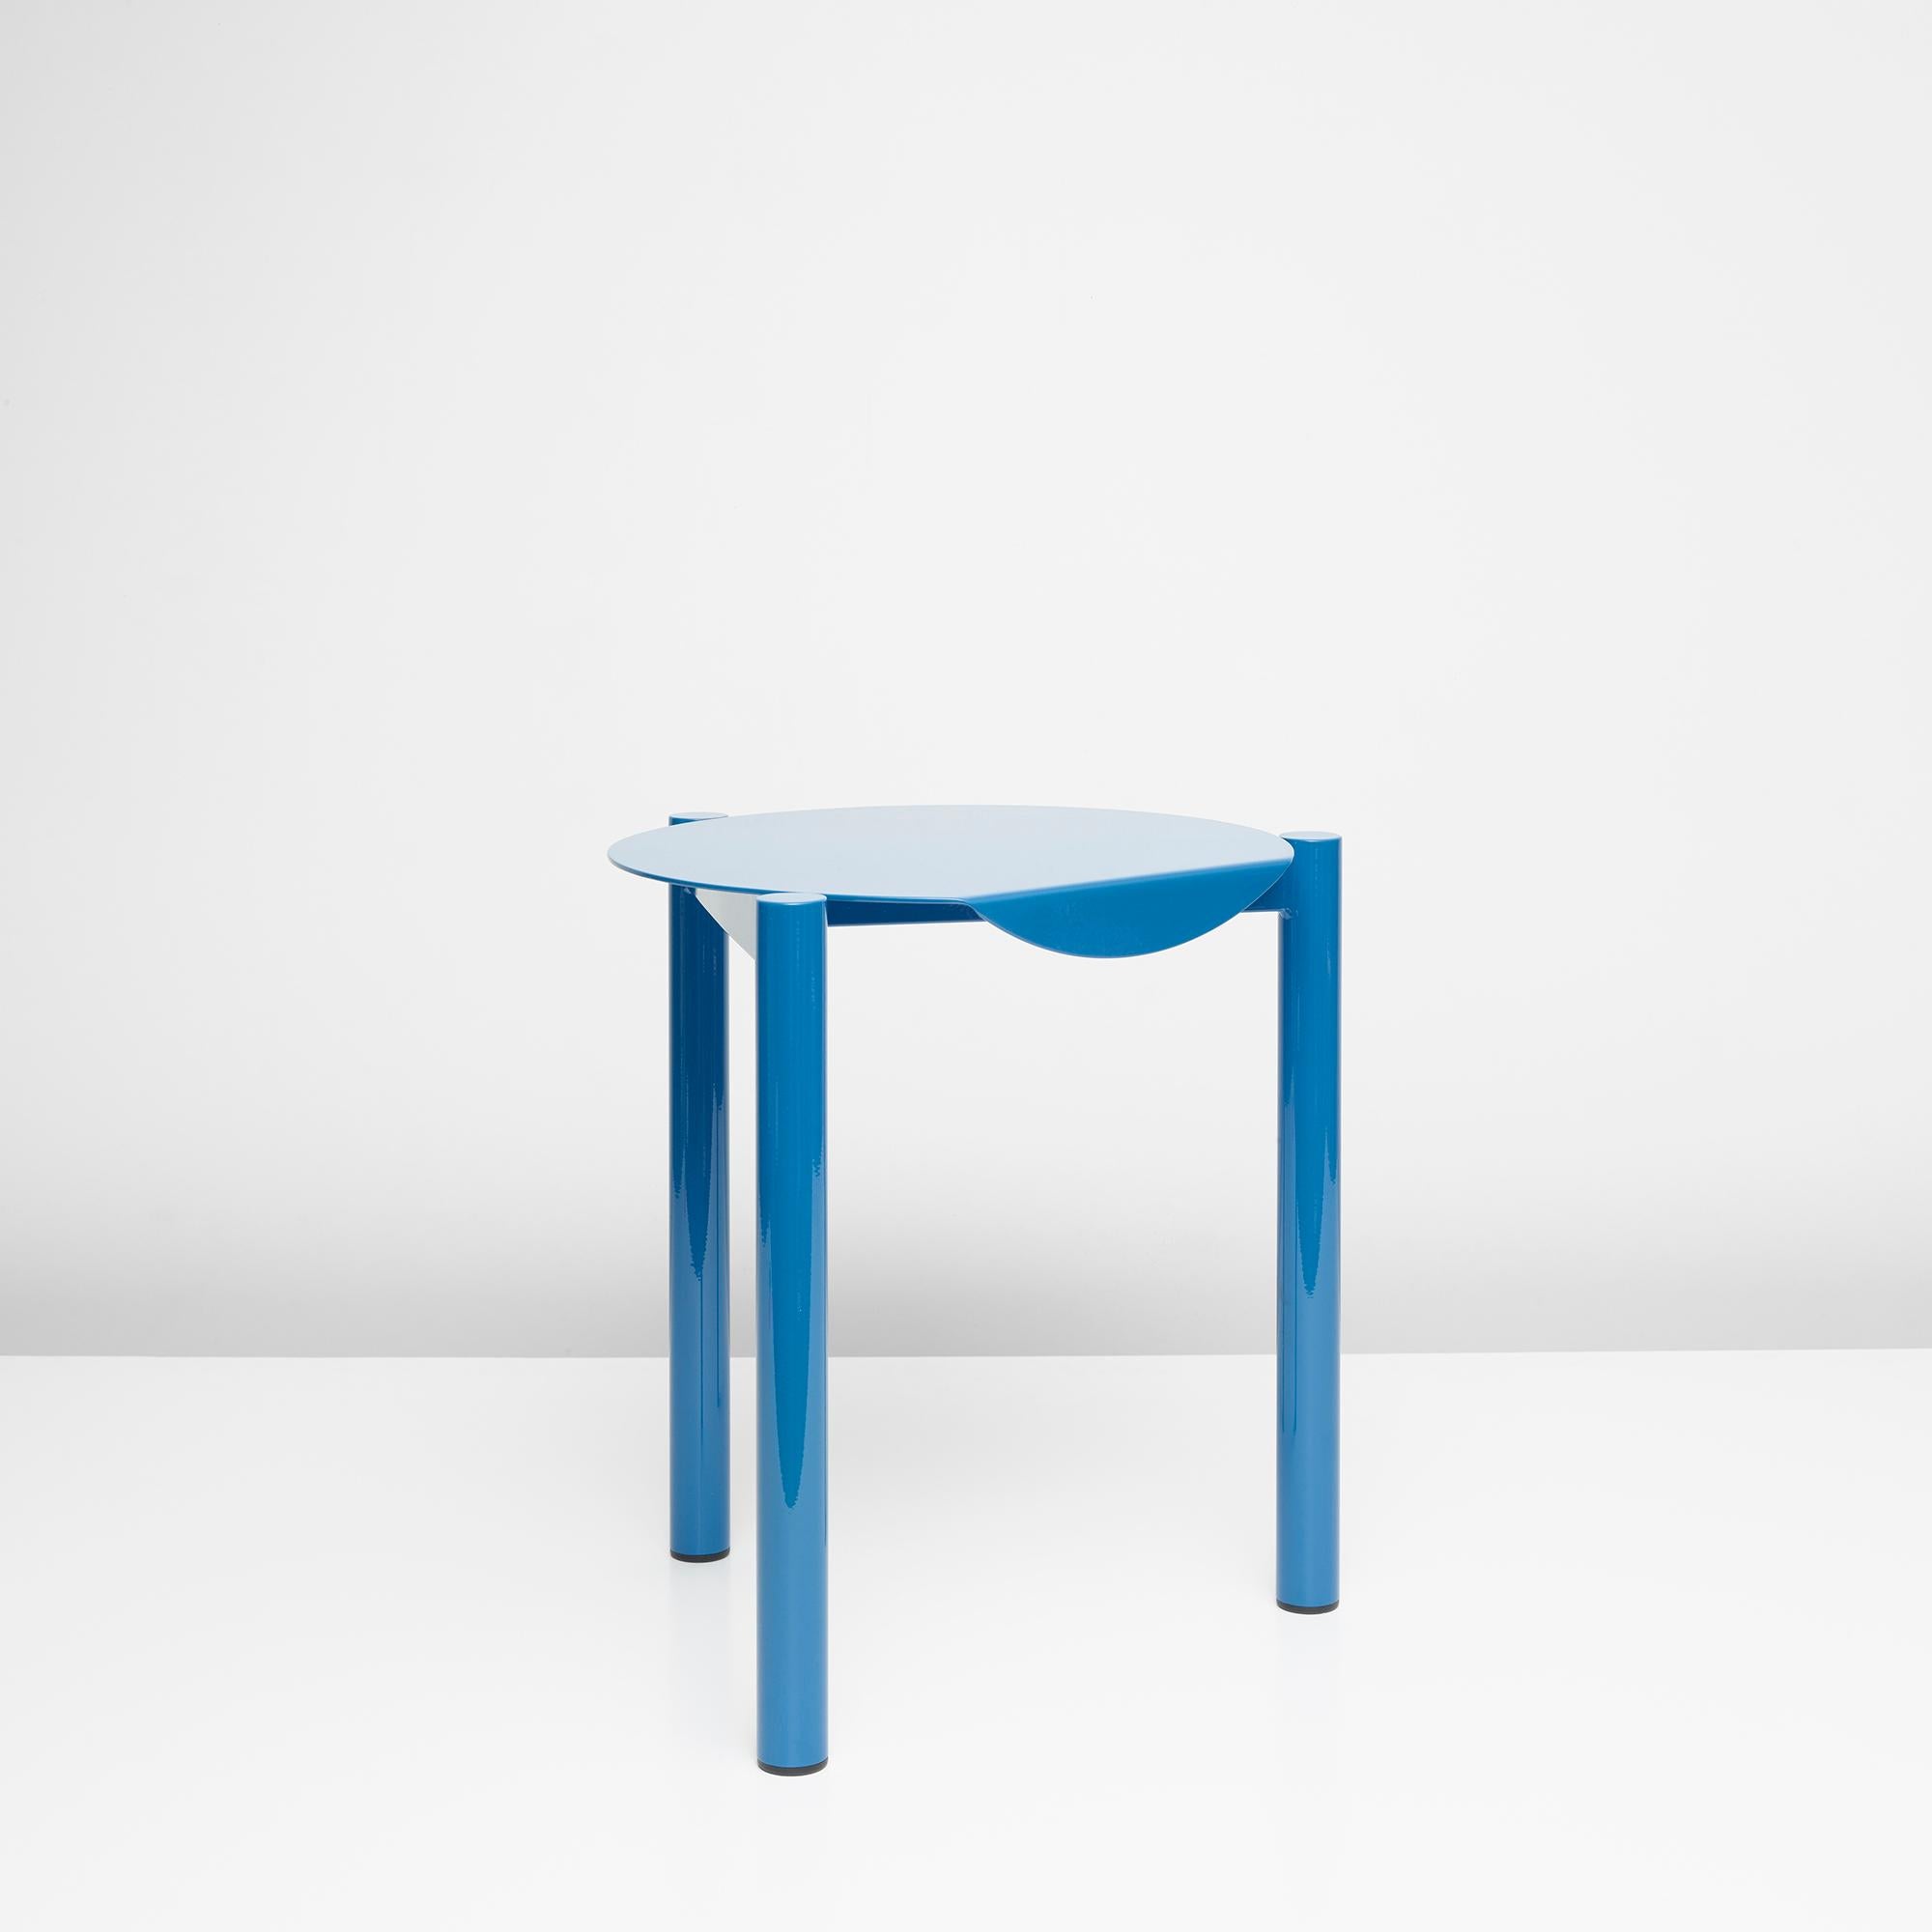 Powder-coated tubular steel contemporary stool / side table .

The B-series takes the graphical shapes found in the urban environment and reimagines them in to a bold statement furniture. With both post-modernist and modernist influences that